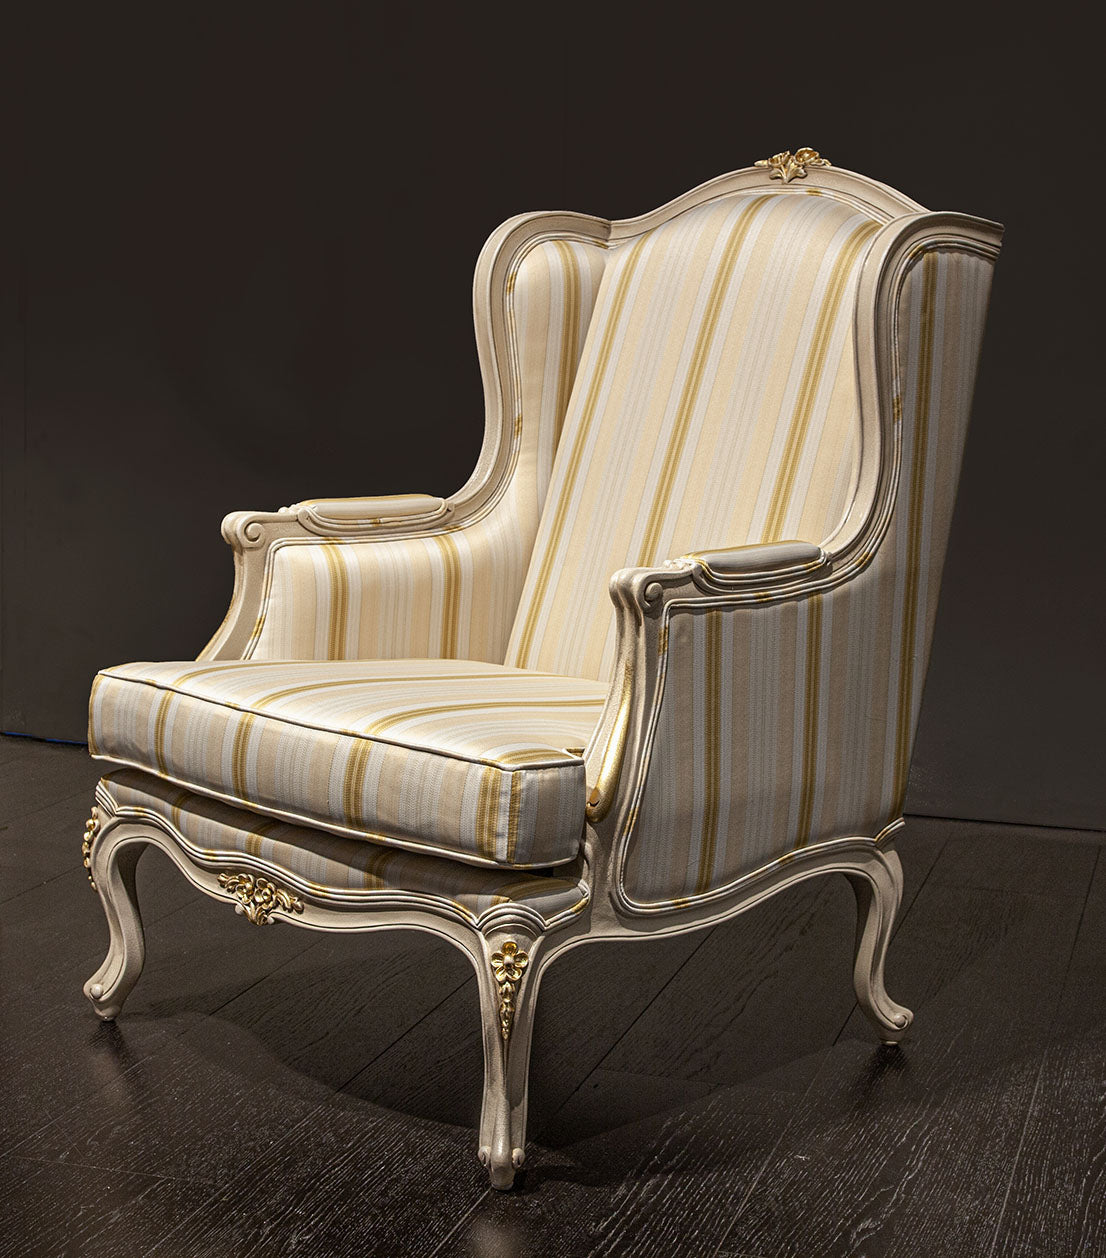 LARGE LOUIS XV WING BACK CHAIR